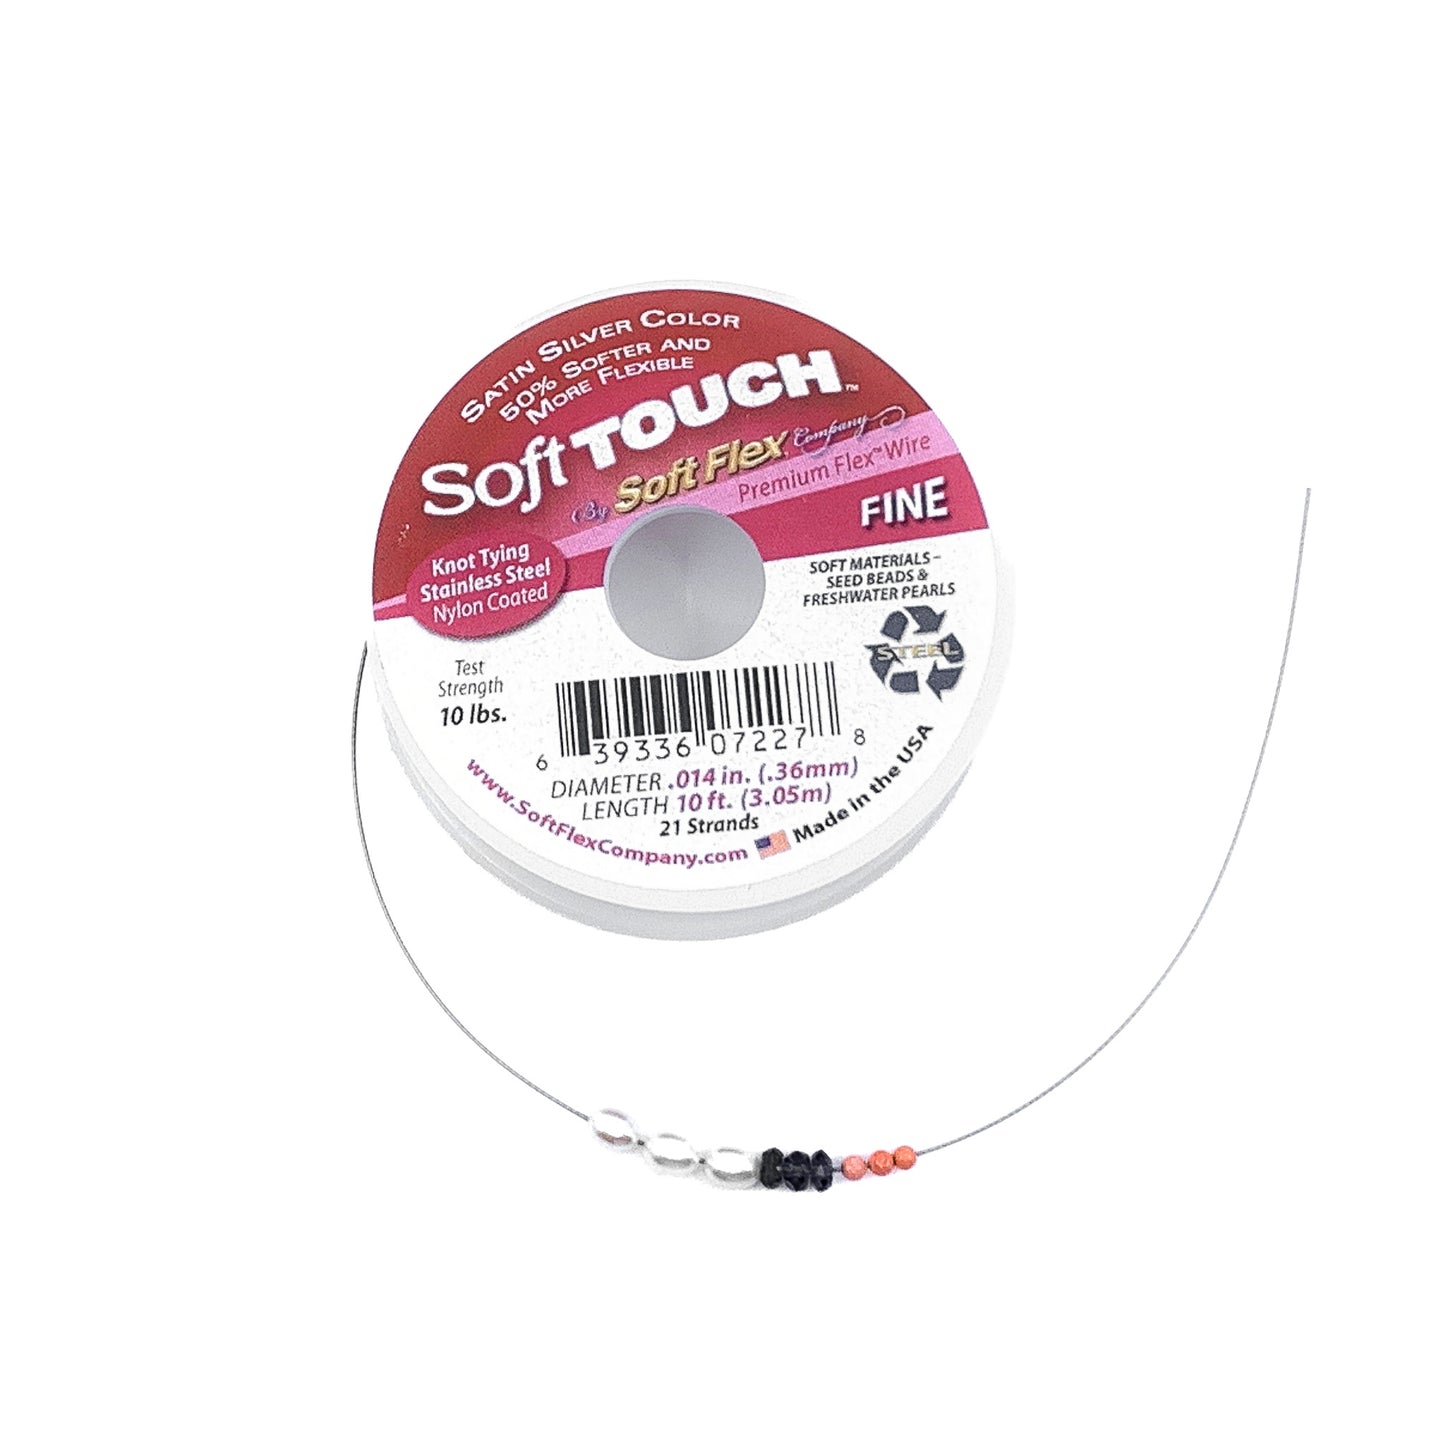 .014" Soft TOUCH 21-strand Premium Beading Cable-The Bead Gallery Honolulu